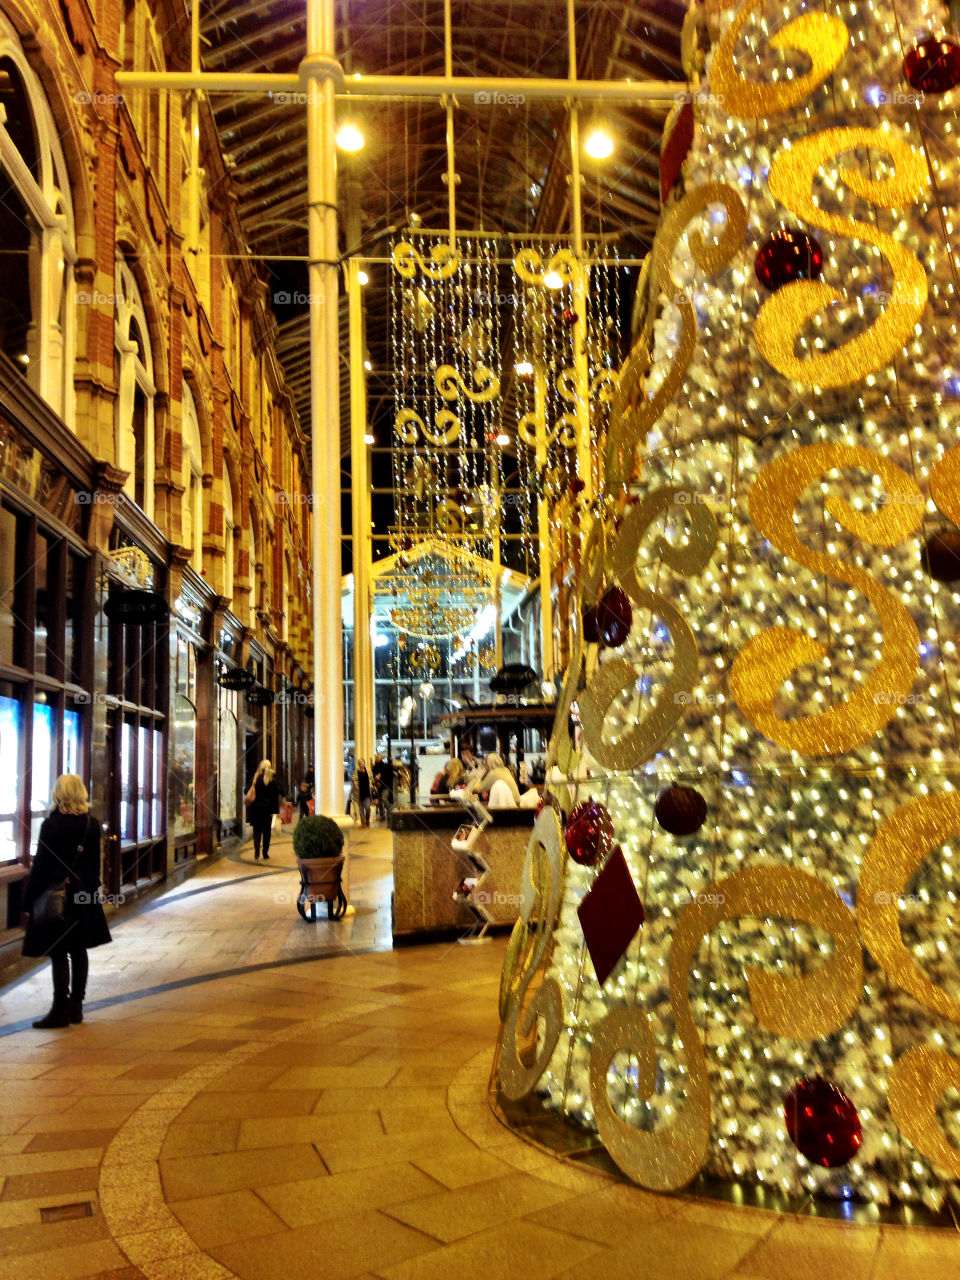 Victoria quarter Leeds Christmas time golden decorations . Leeds at Christmas in the victoria quarter gold decorations and tree